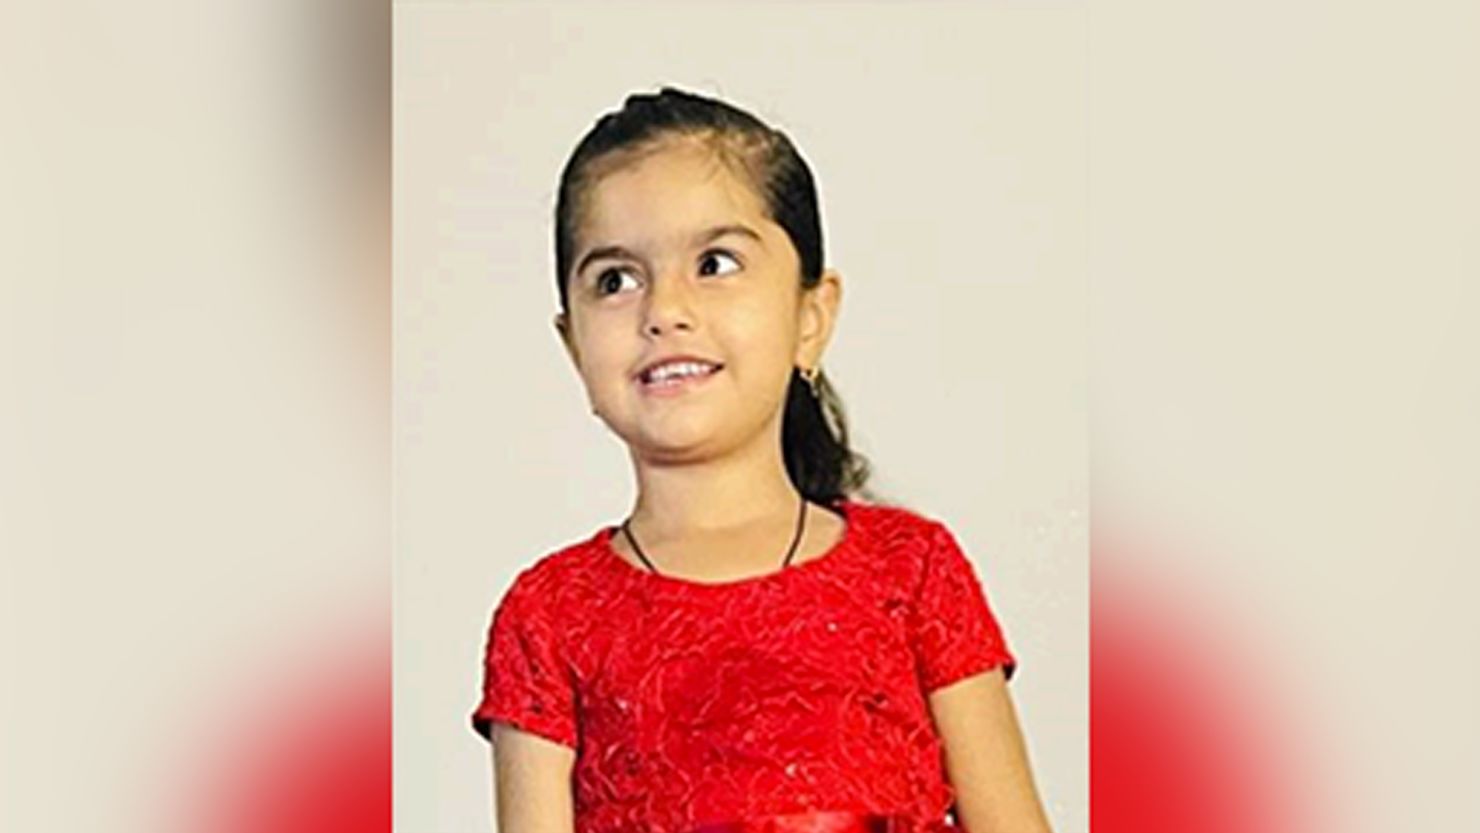 Lina Sadar Khil went missing from a San Antonio playground in her family's apartment complex on December 20, 2021.